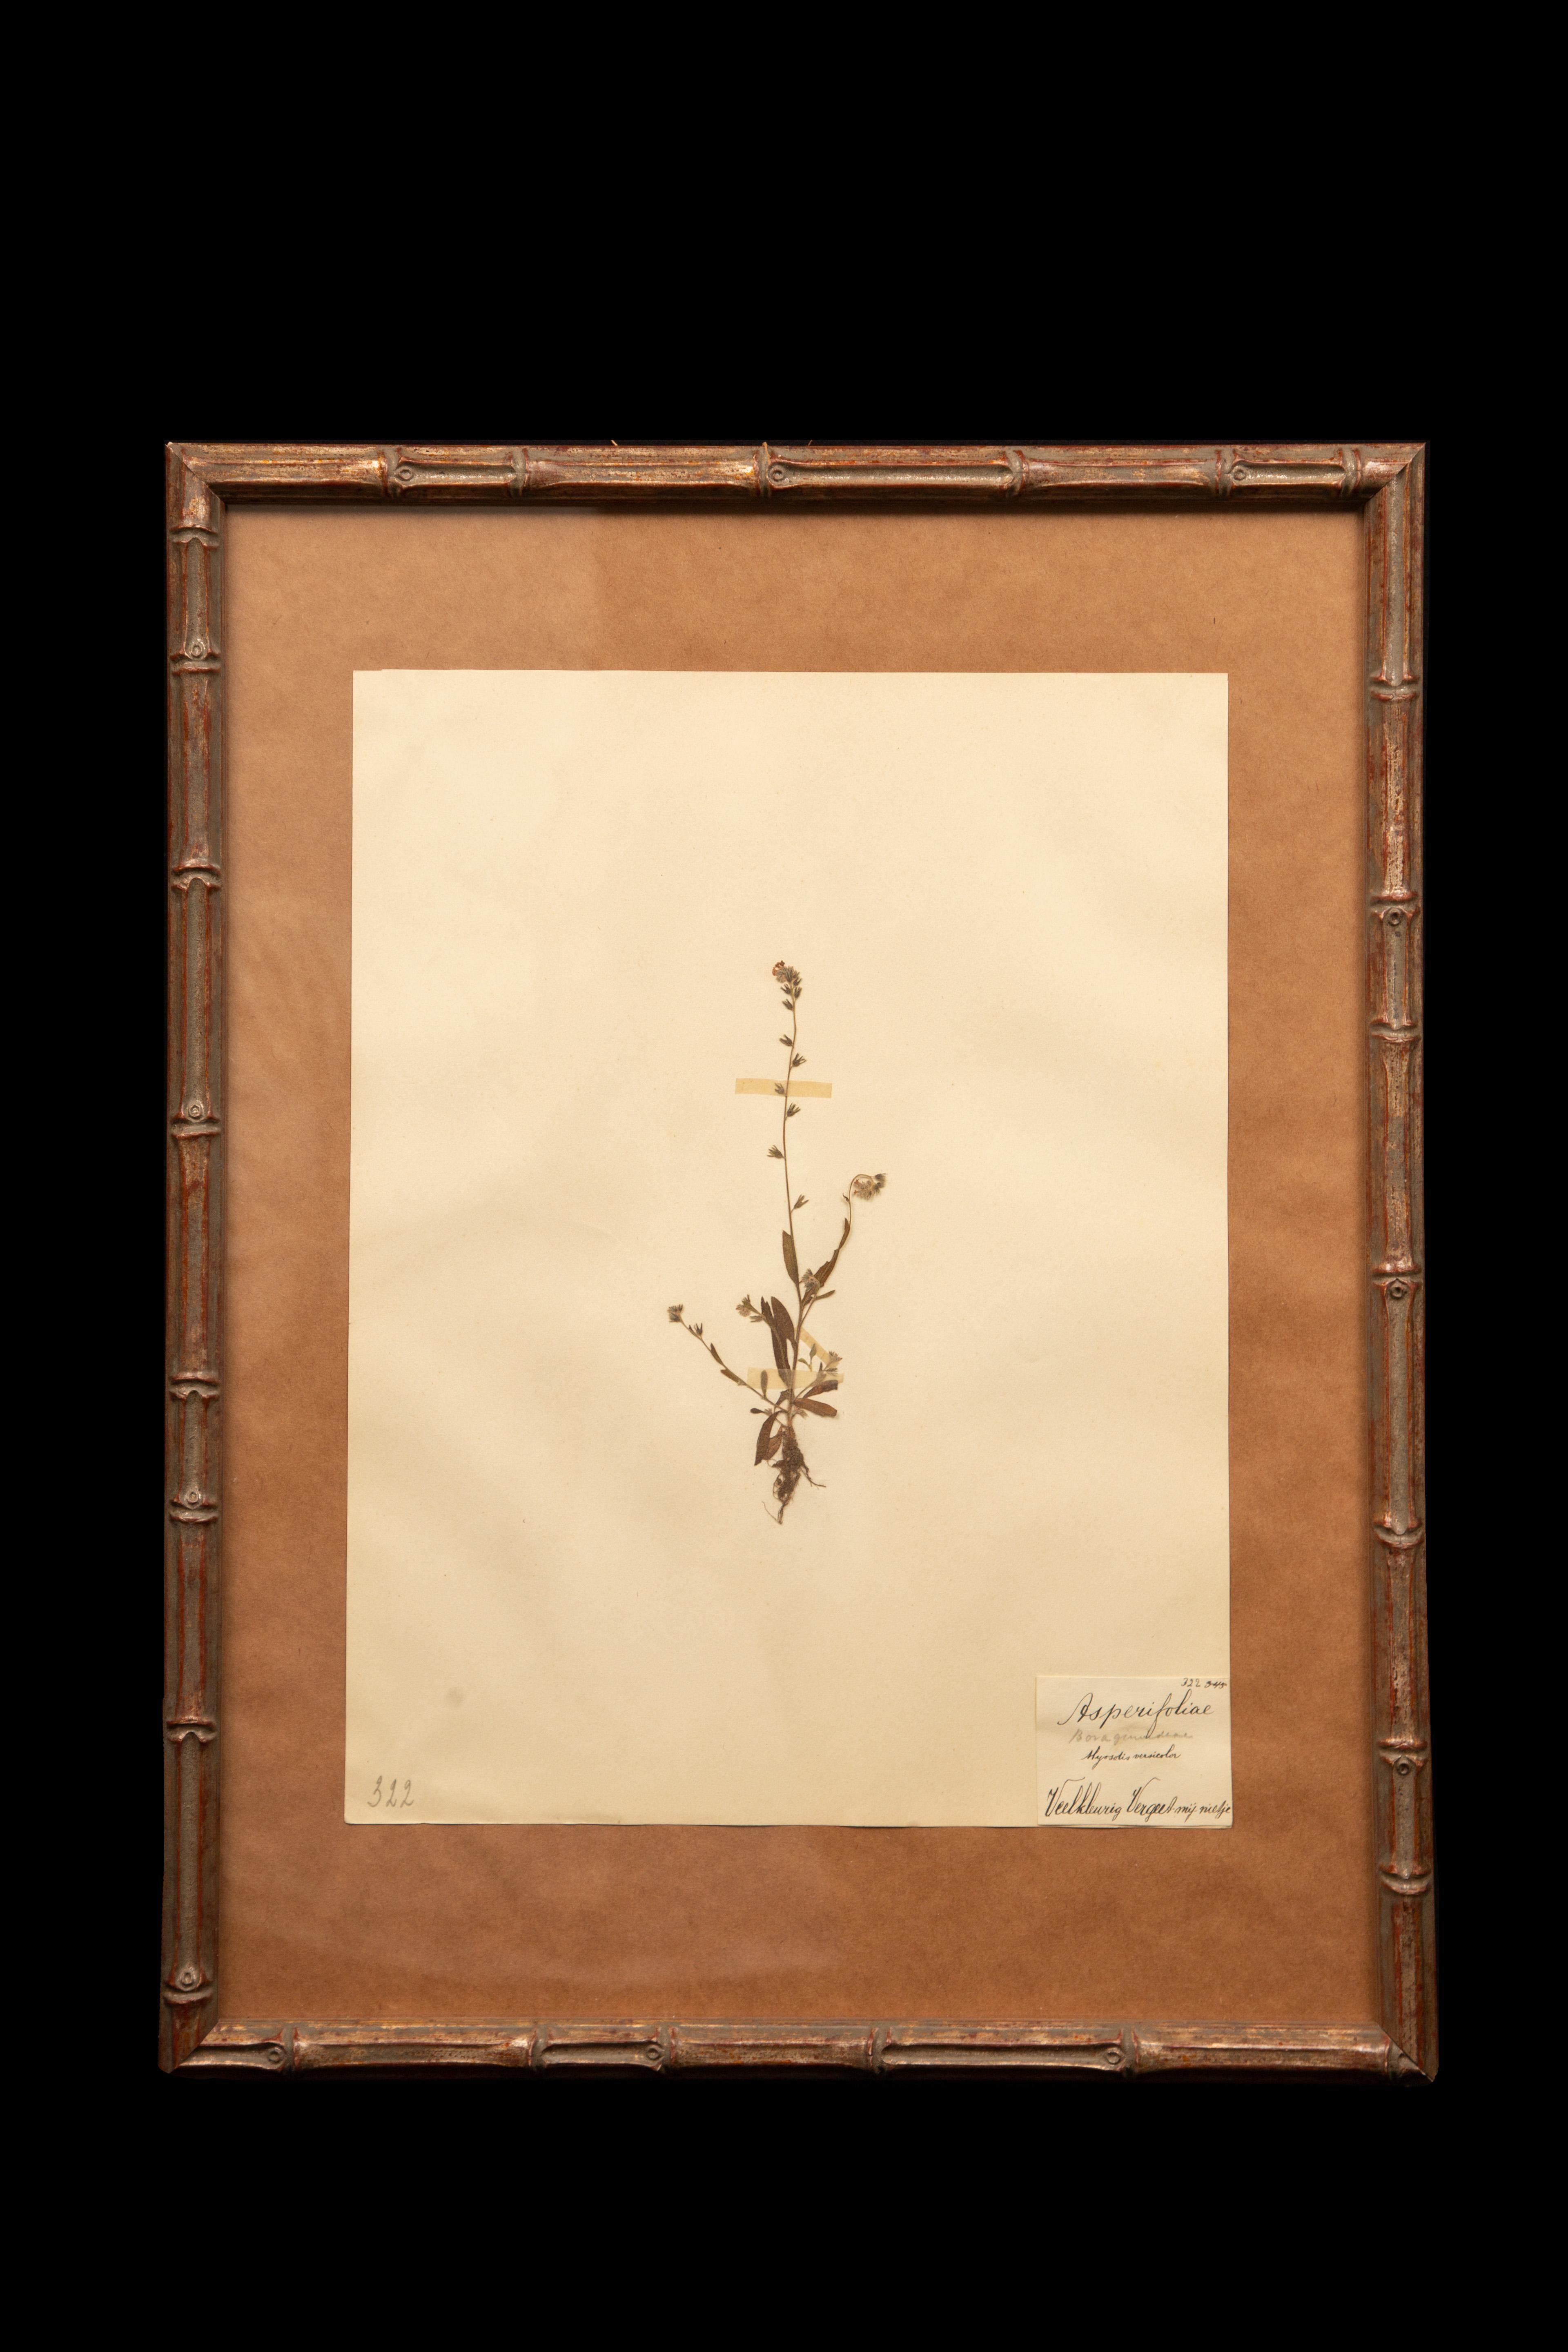 Gilt Framed Herbier Botanical Specimens from the 19th Century In Excellent Condition For Sale In New York, NY